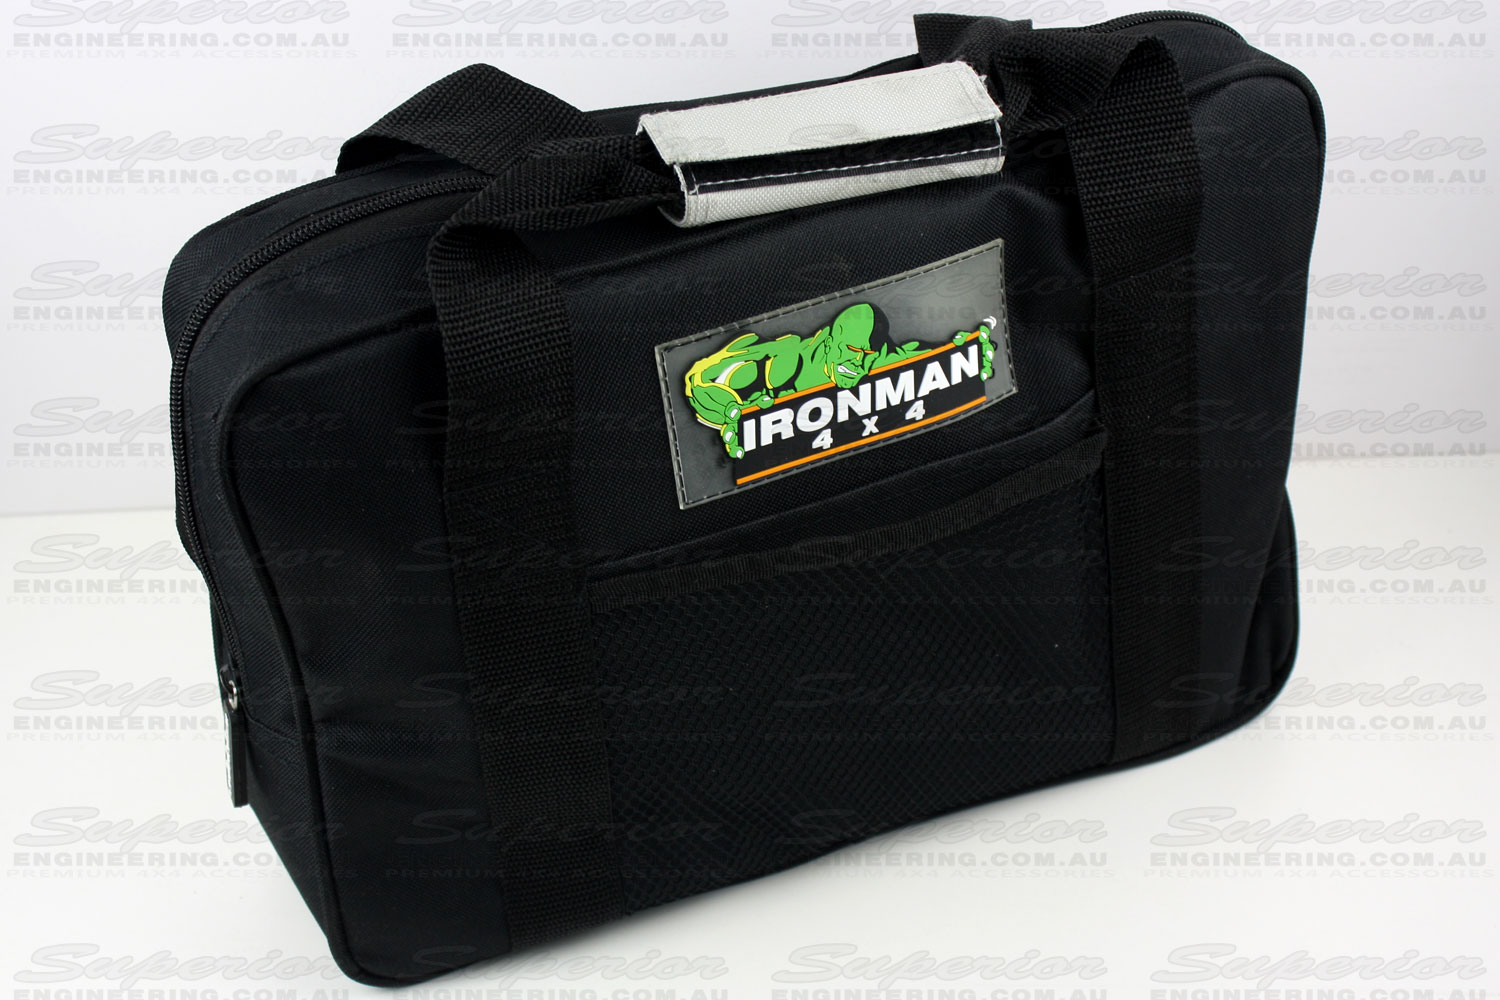 The heavy duty small Ironman recovery kit bag